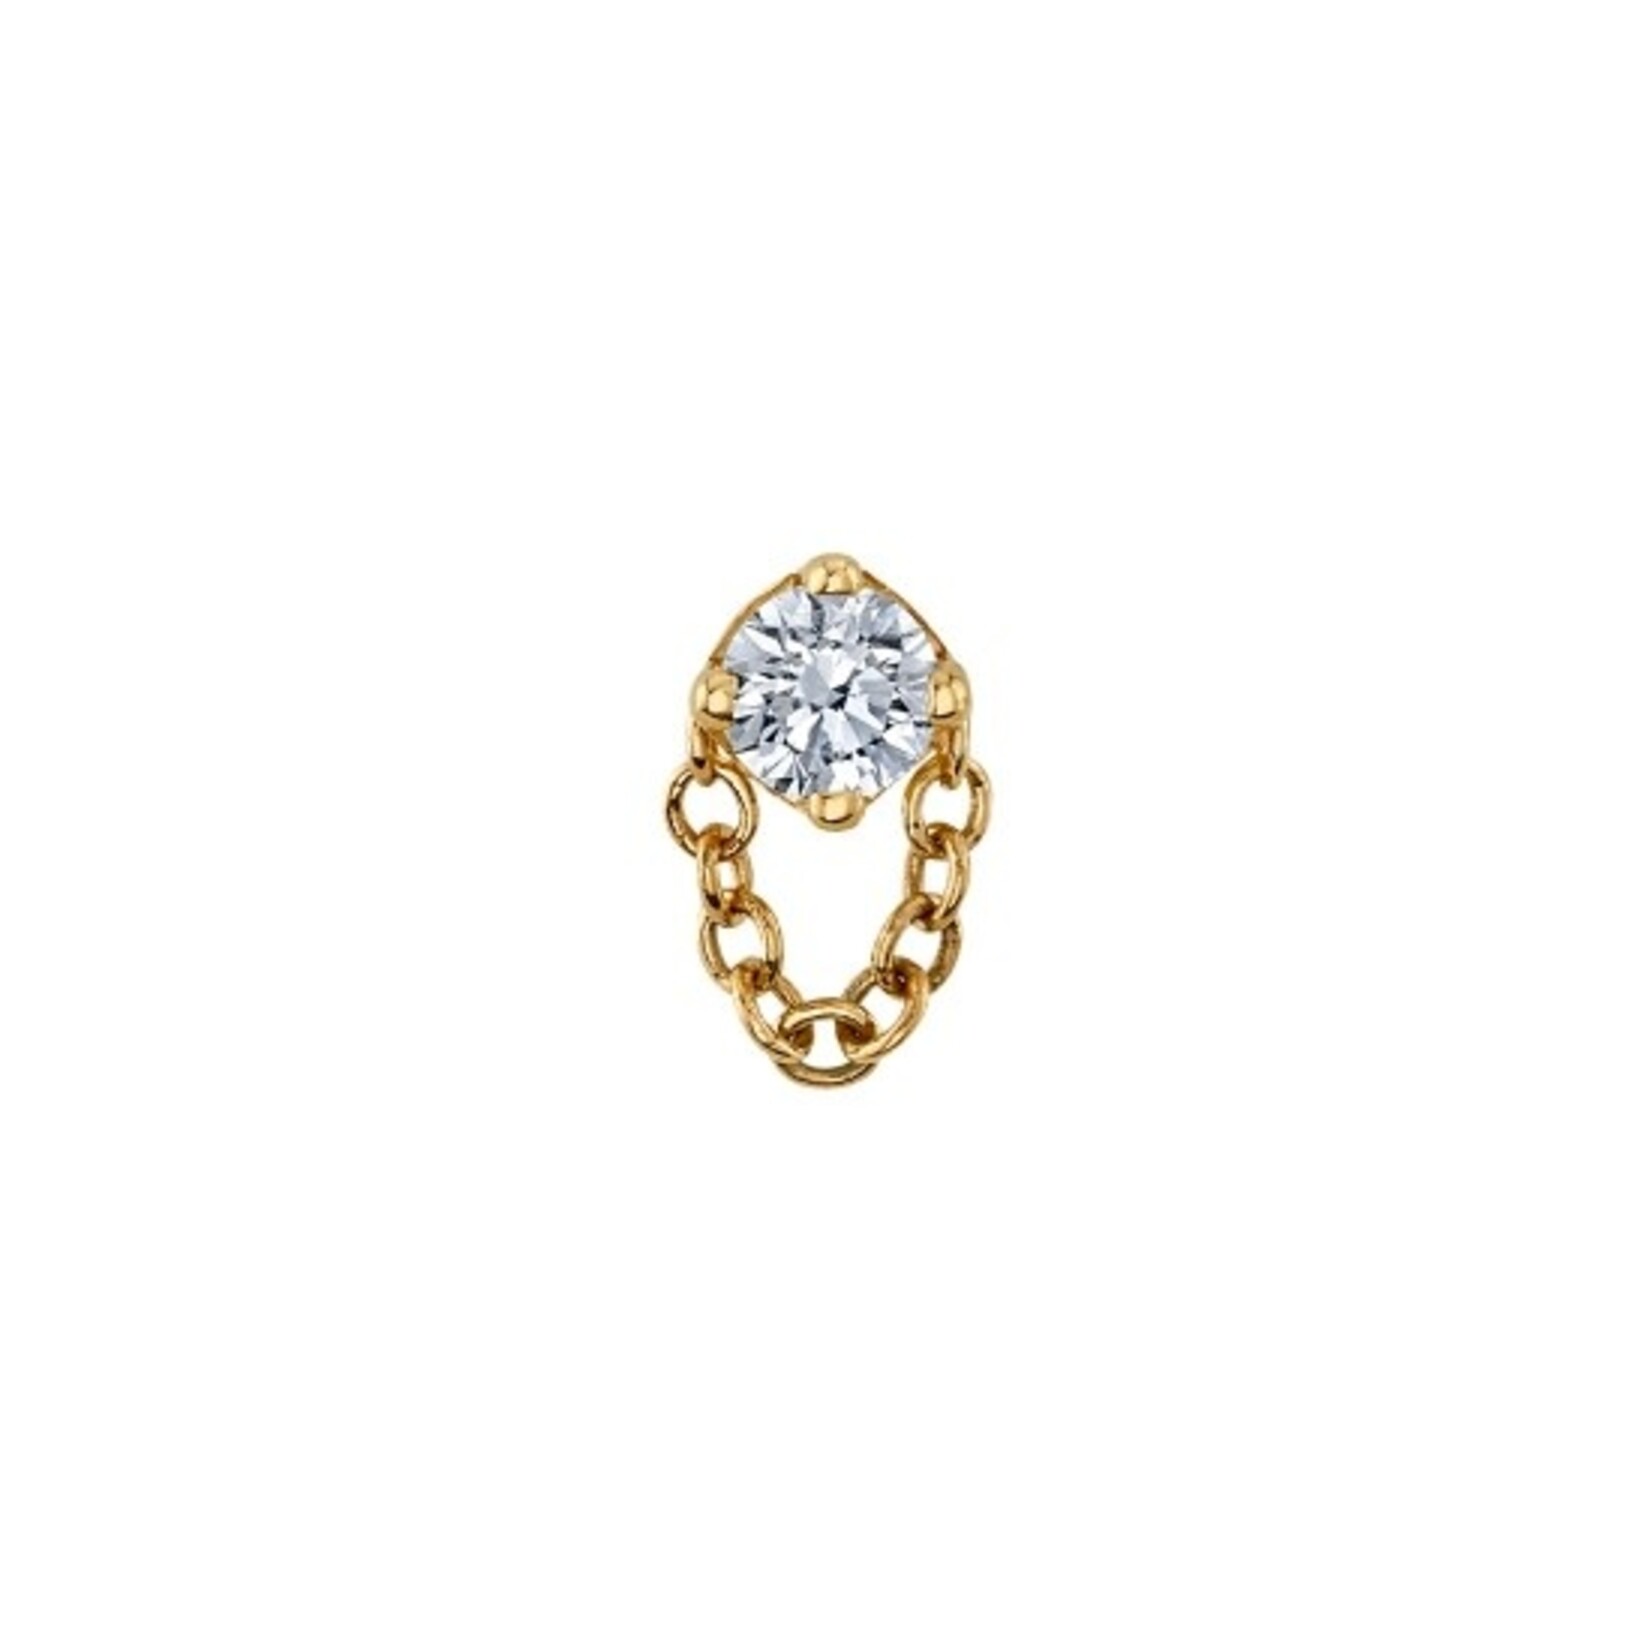 BVLA BVLA "Rianna" threaded end with chain and 2.5 CZ